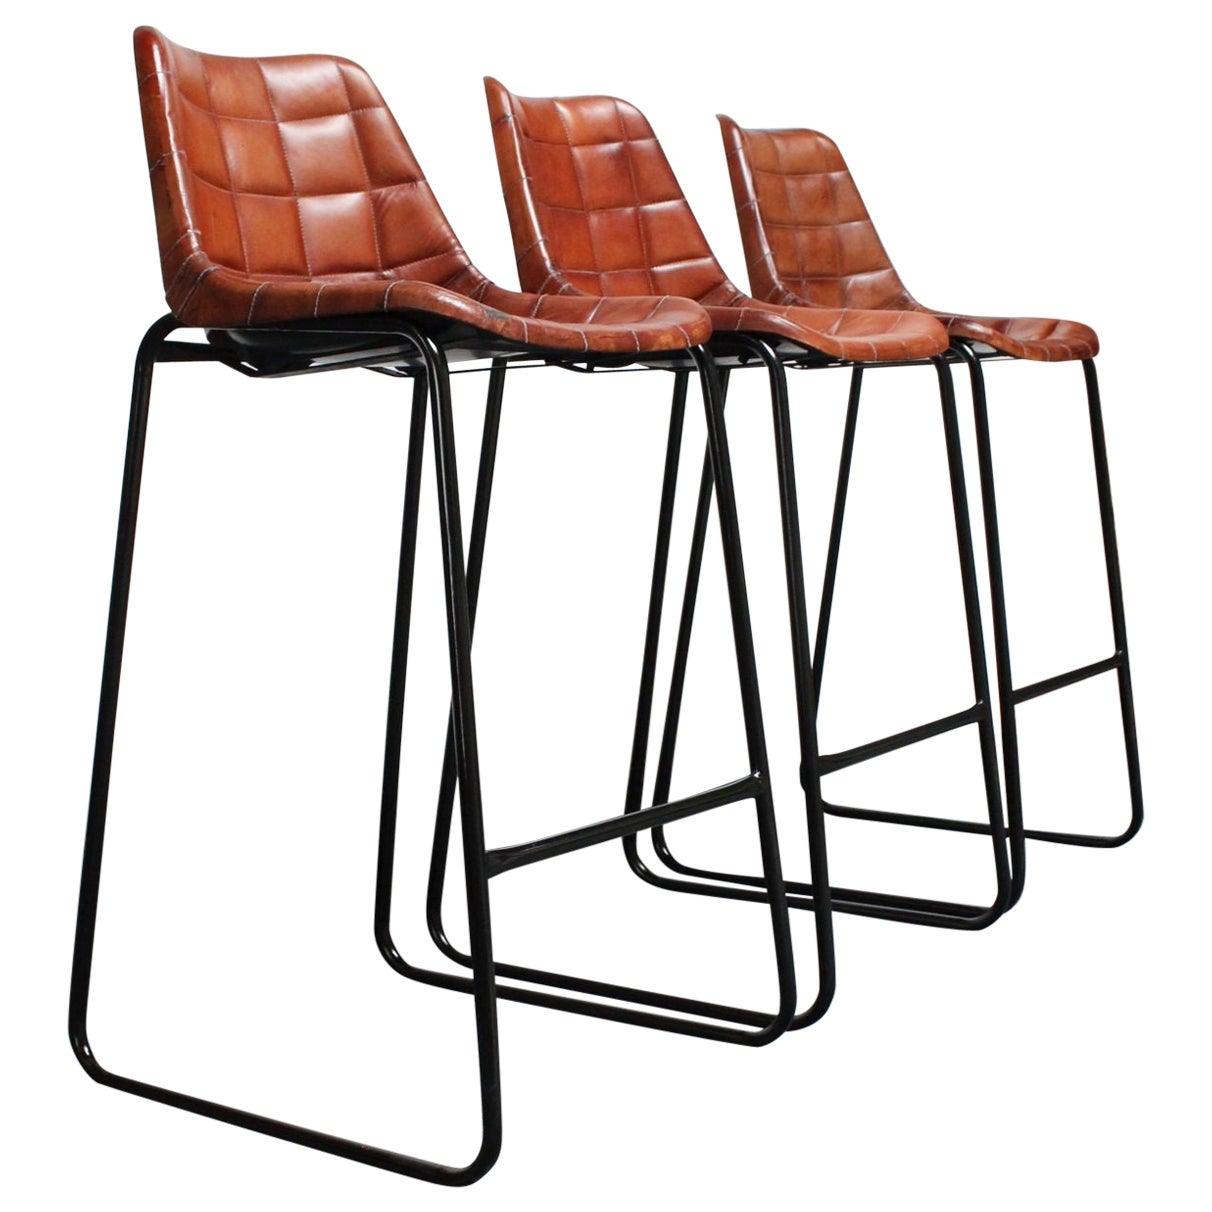 Set of Three Italian Vintage Leatherette and Wrought Iron Barstools For Sale